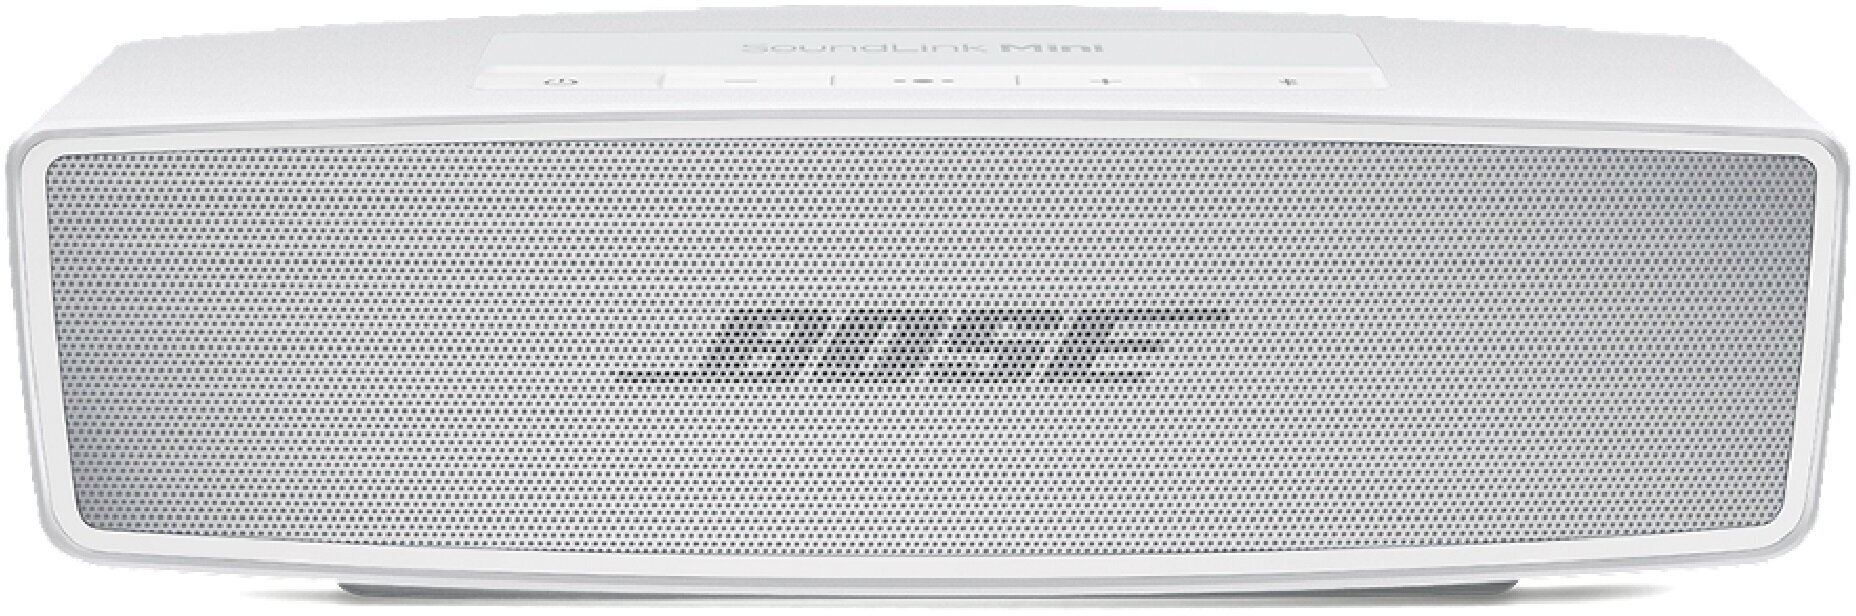 Bose SoundLink Mini II Special Edition Luxe Silver